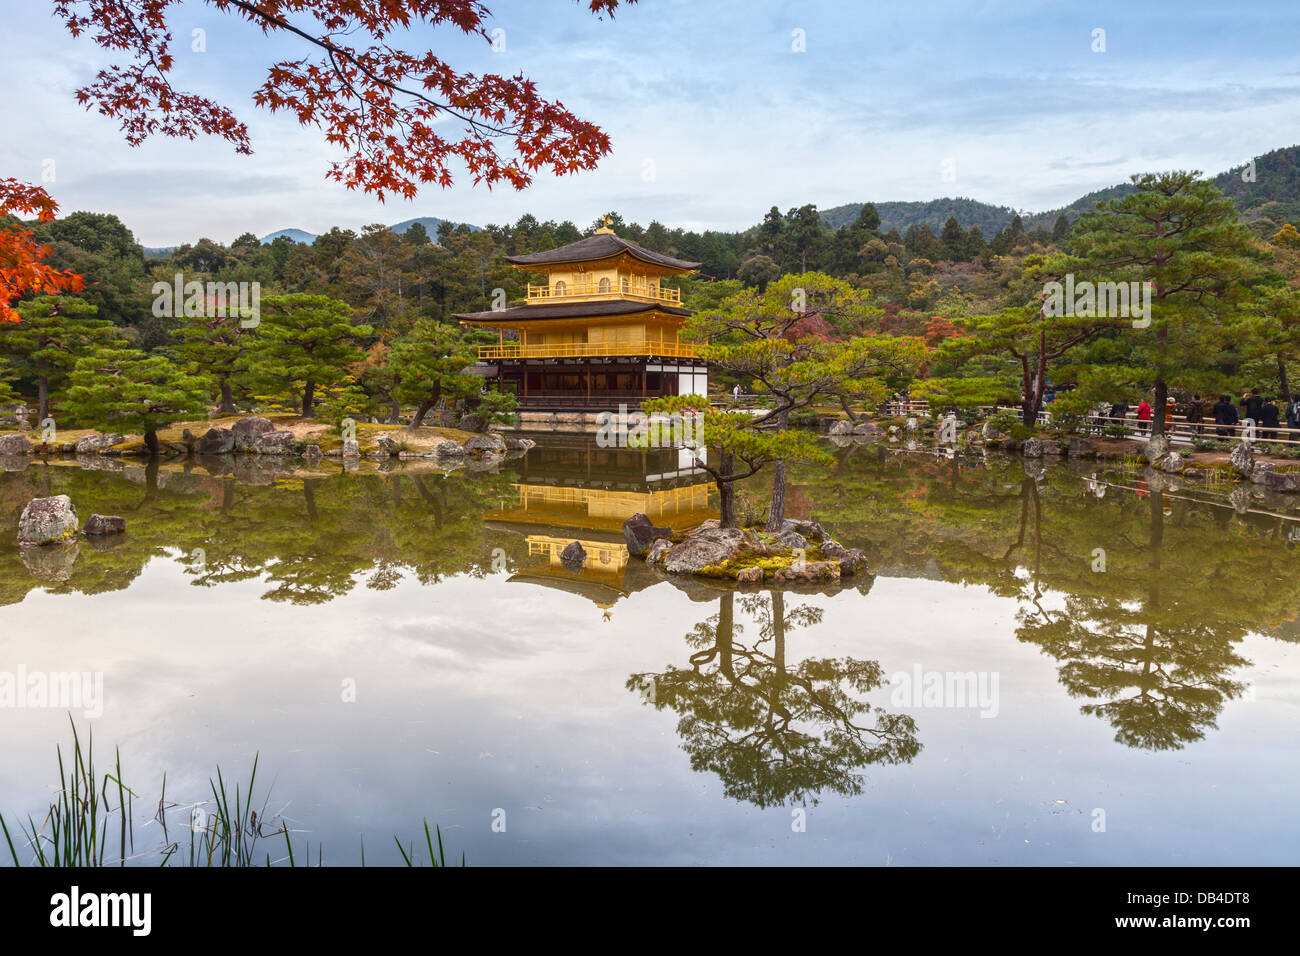 The Golden Pavilion of the temple of Kinkaku-ji or Rokuon-ji in Kyoto, seen in autumn. This Zen Buddhist temple is one of the... Stock Photo